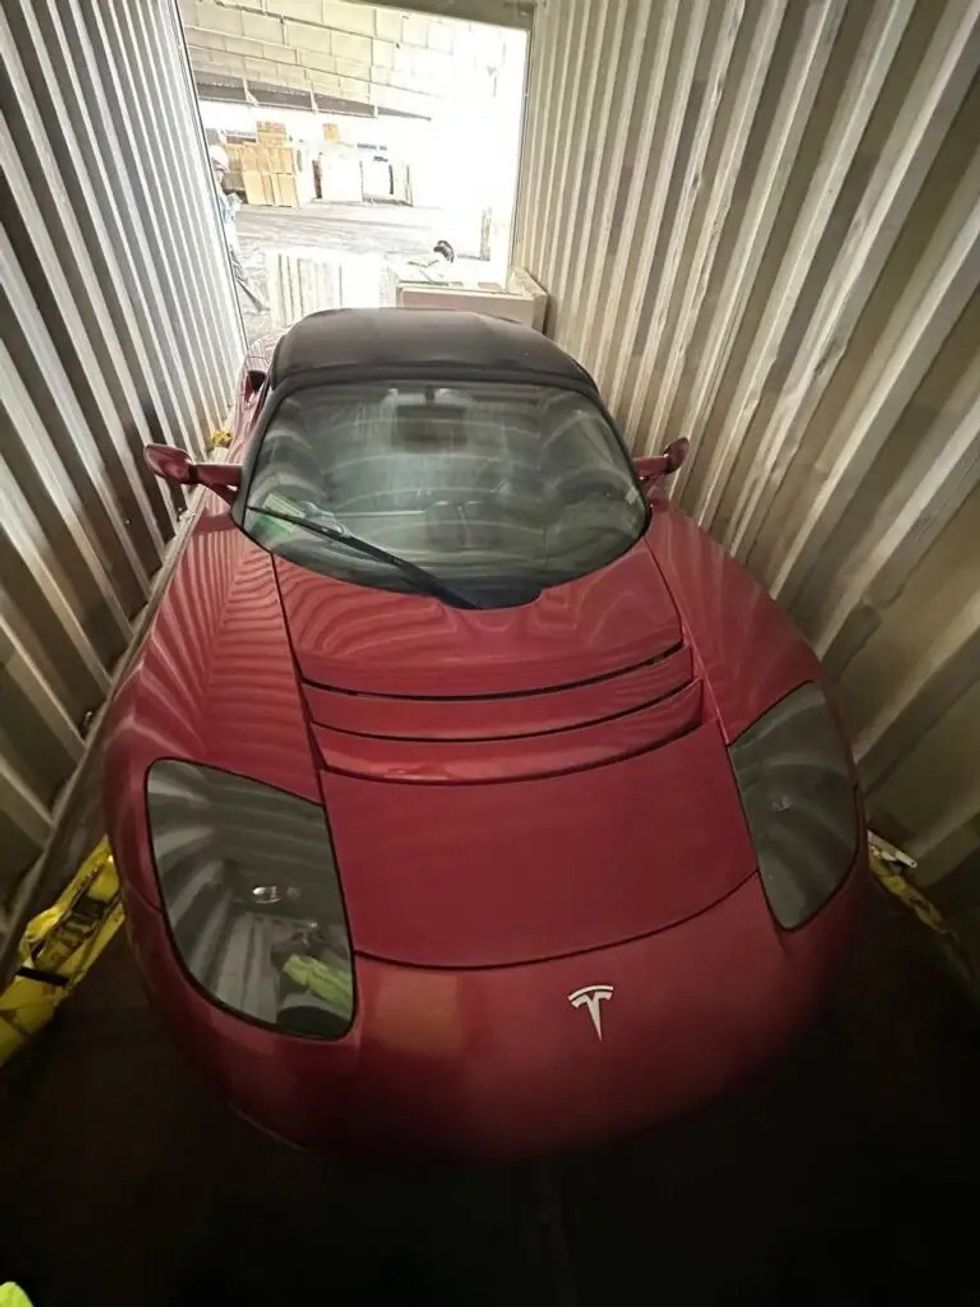 The factory-new Tesla Roadster